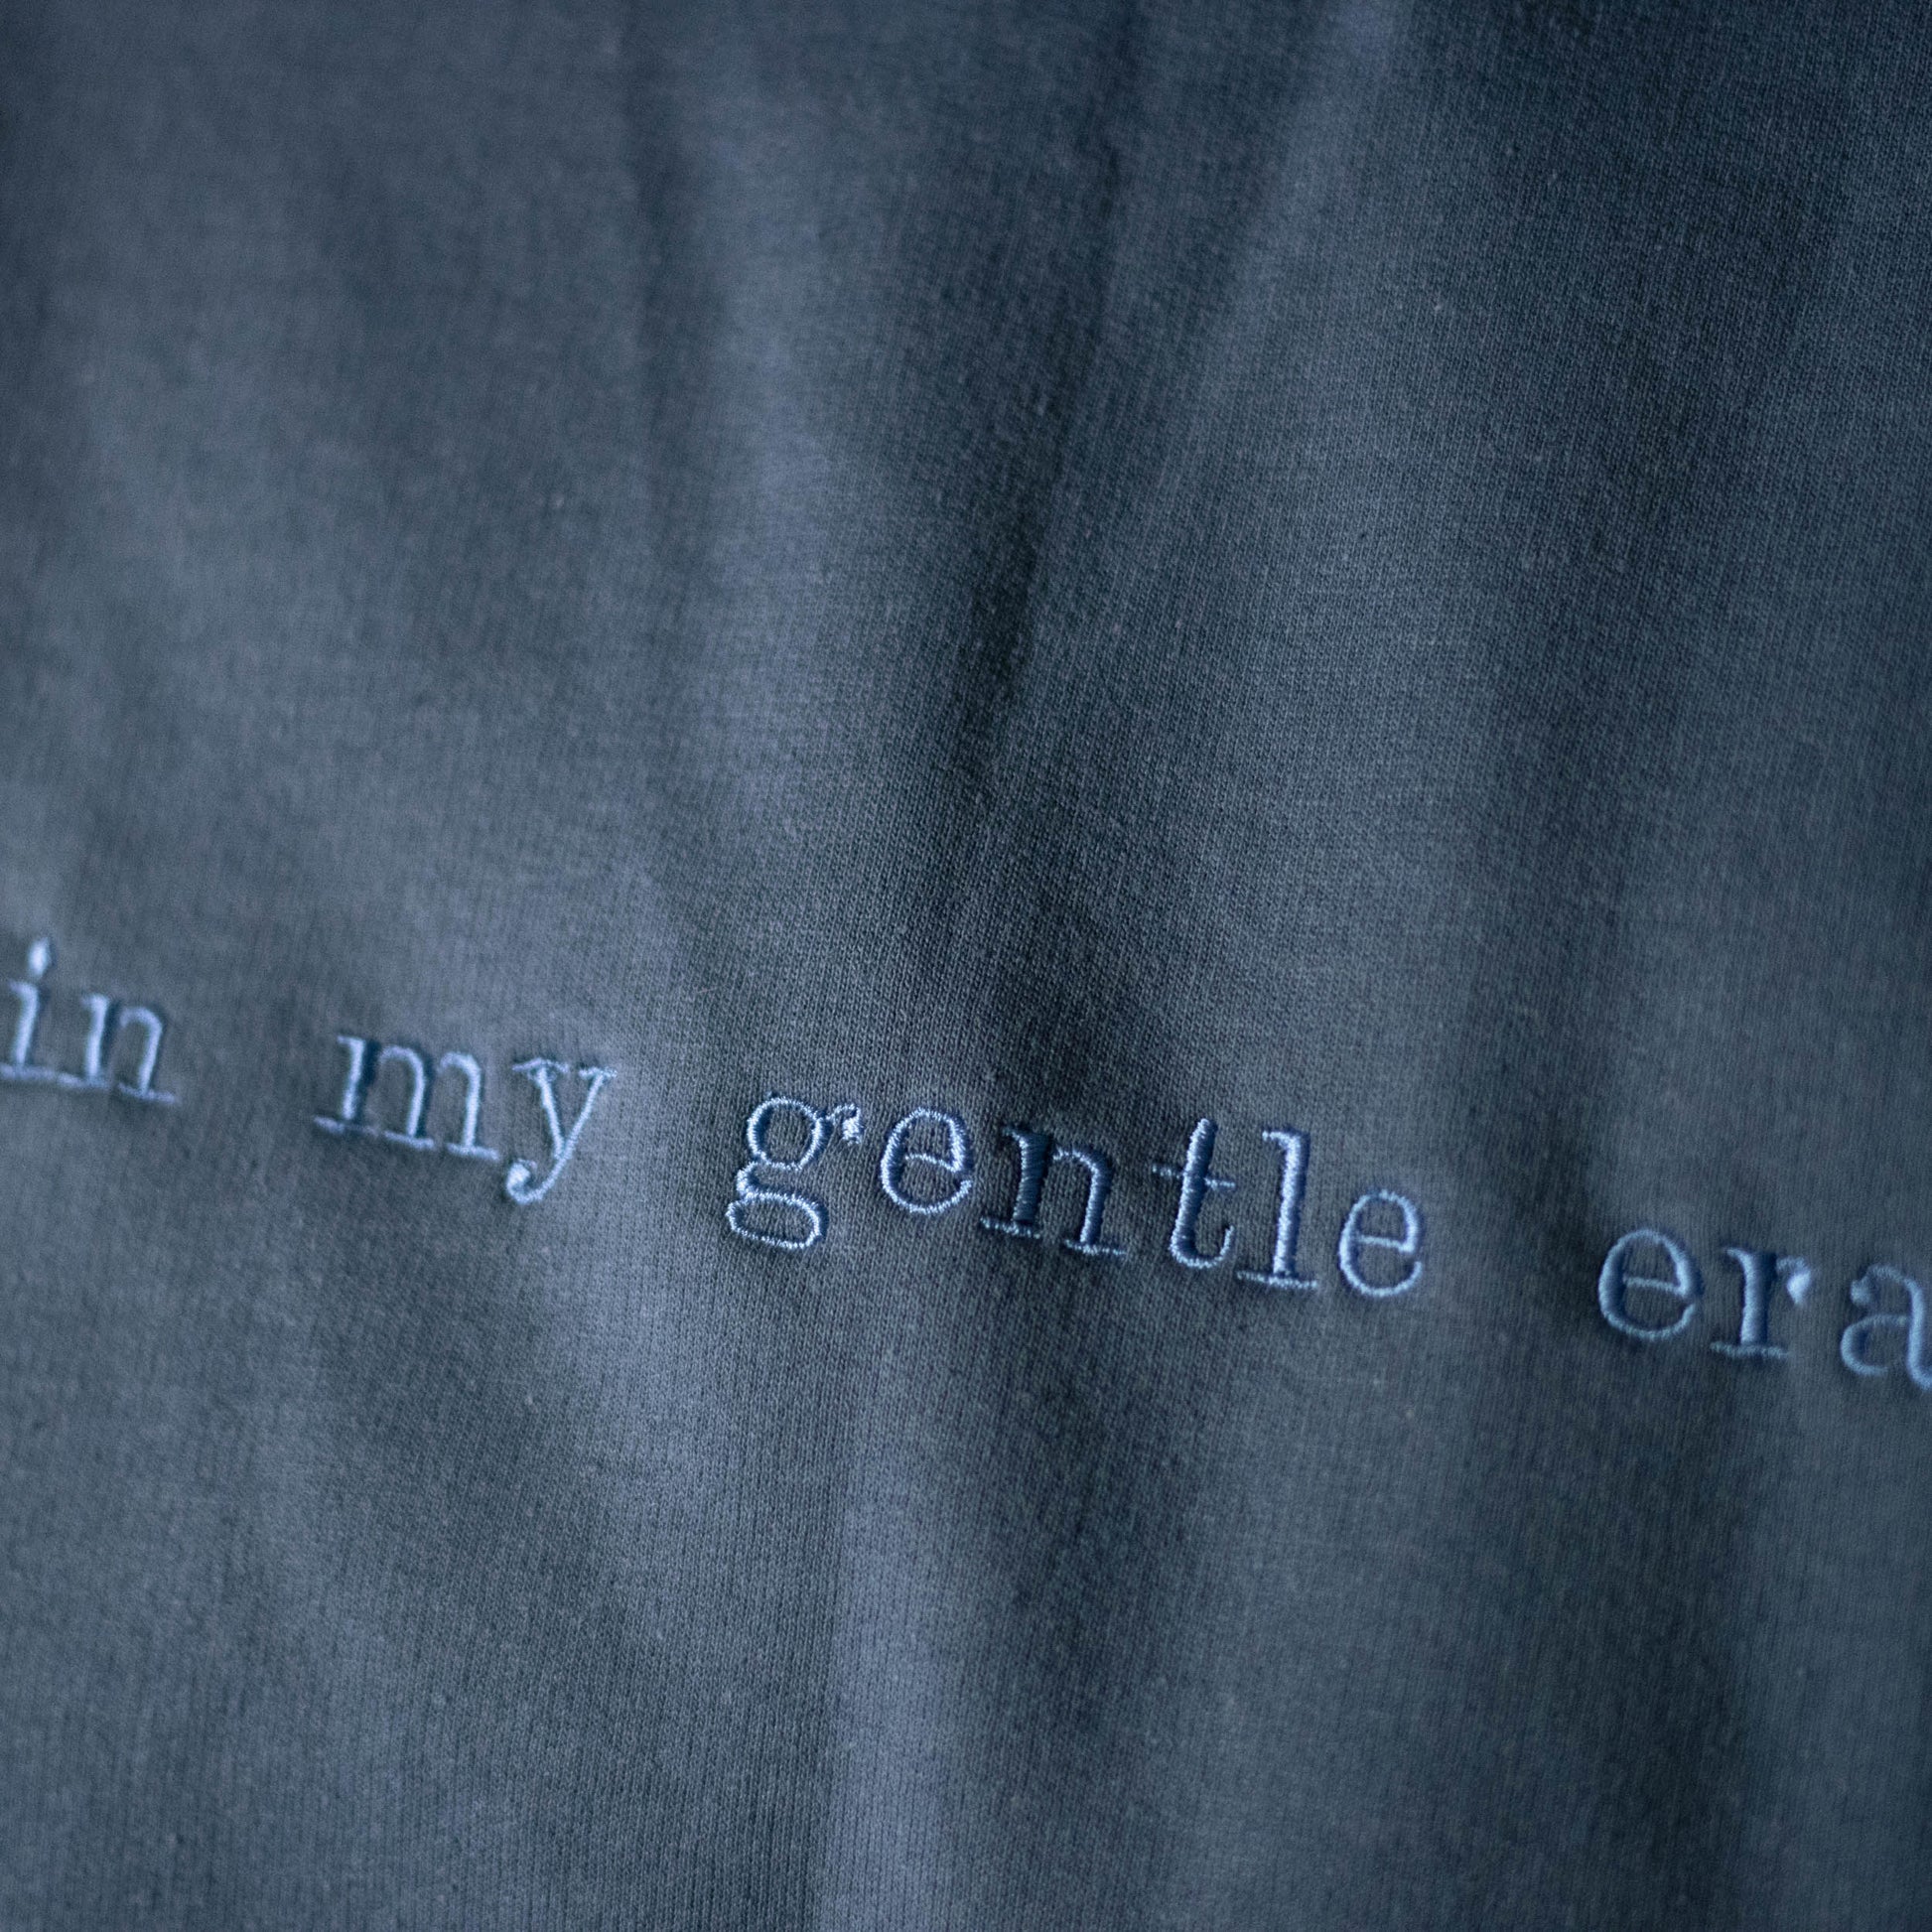 Close up image of the embroidered words on the blue gentle era crewneck sweatshirt. The sweatshirt is a slate blue color with slate blue embroidery on the front that says "in my gentle era".